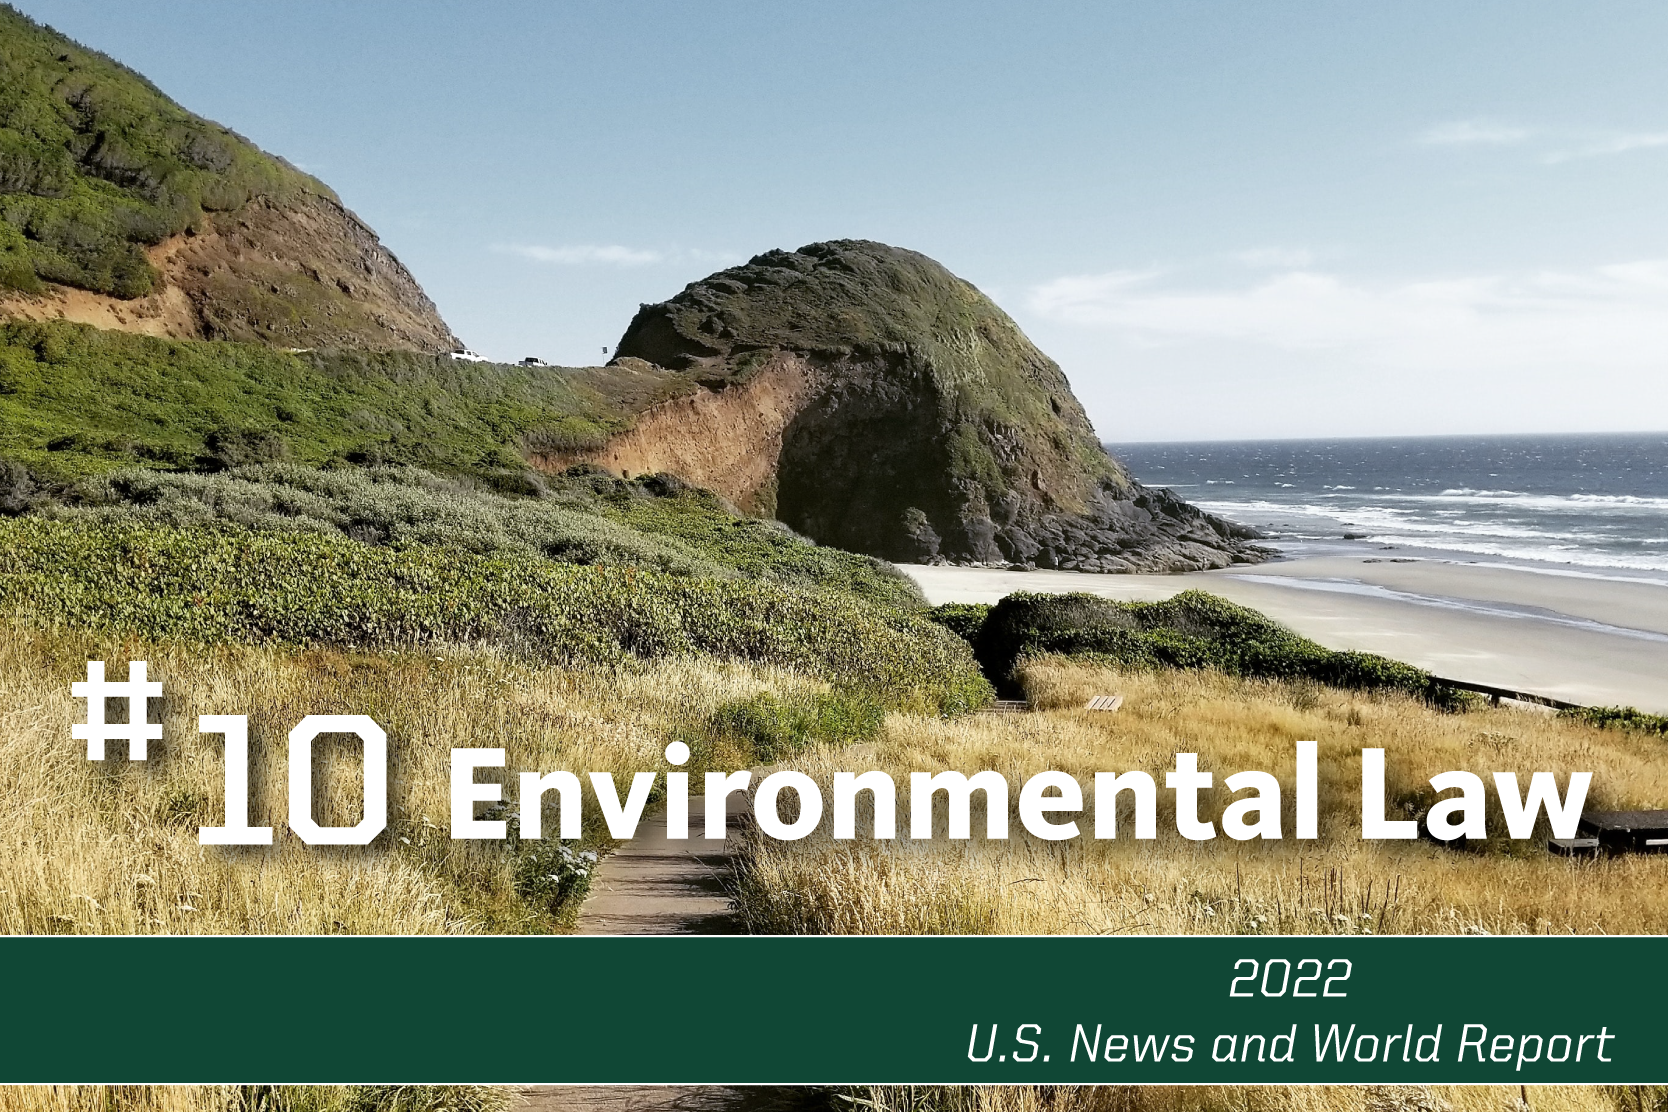 Oregon beach and rock formation, words: #10 Environmental Law 2022 US and World News Report